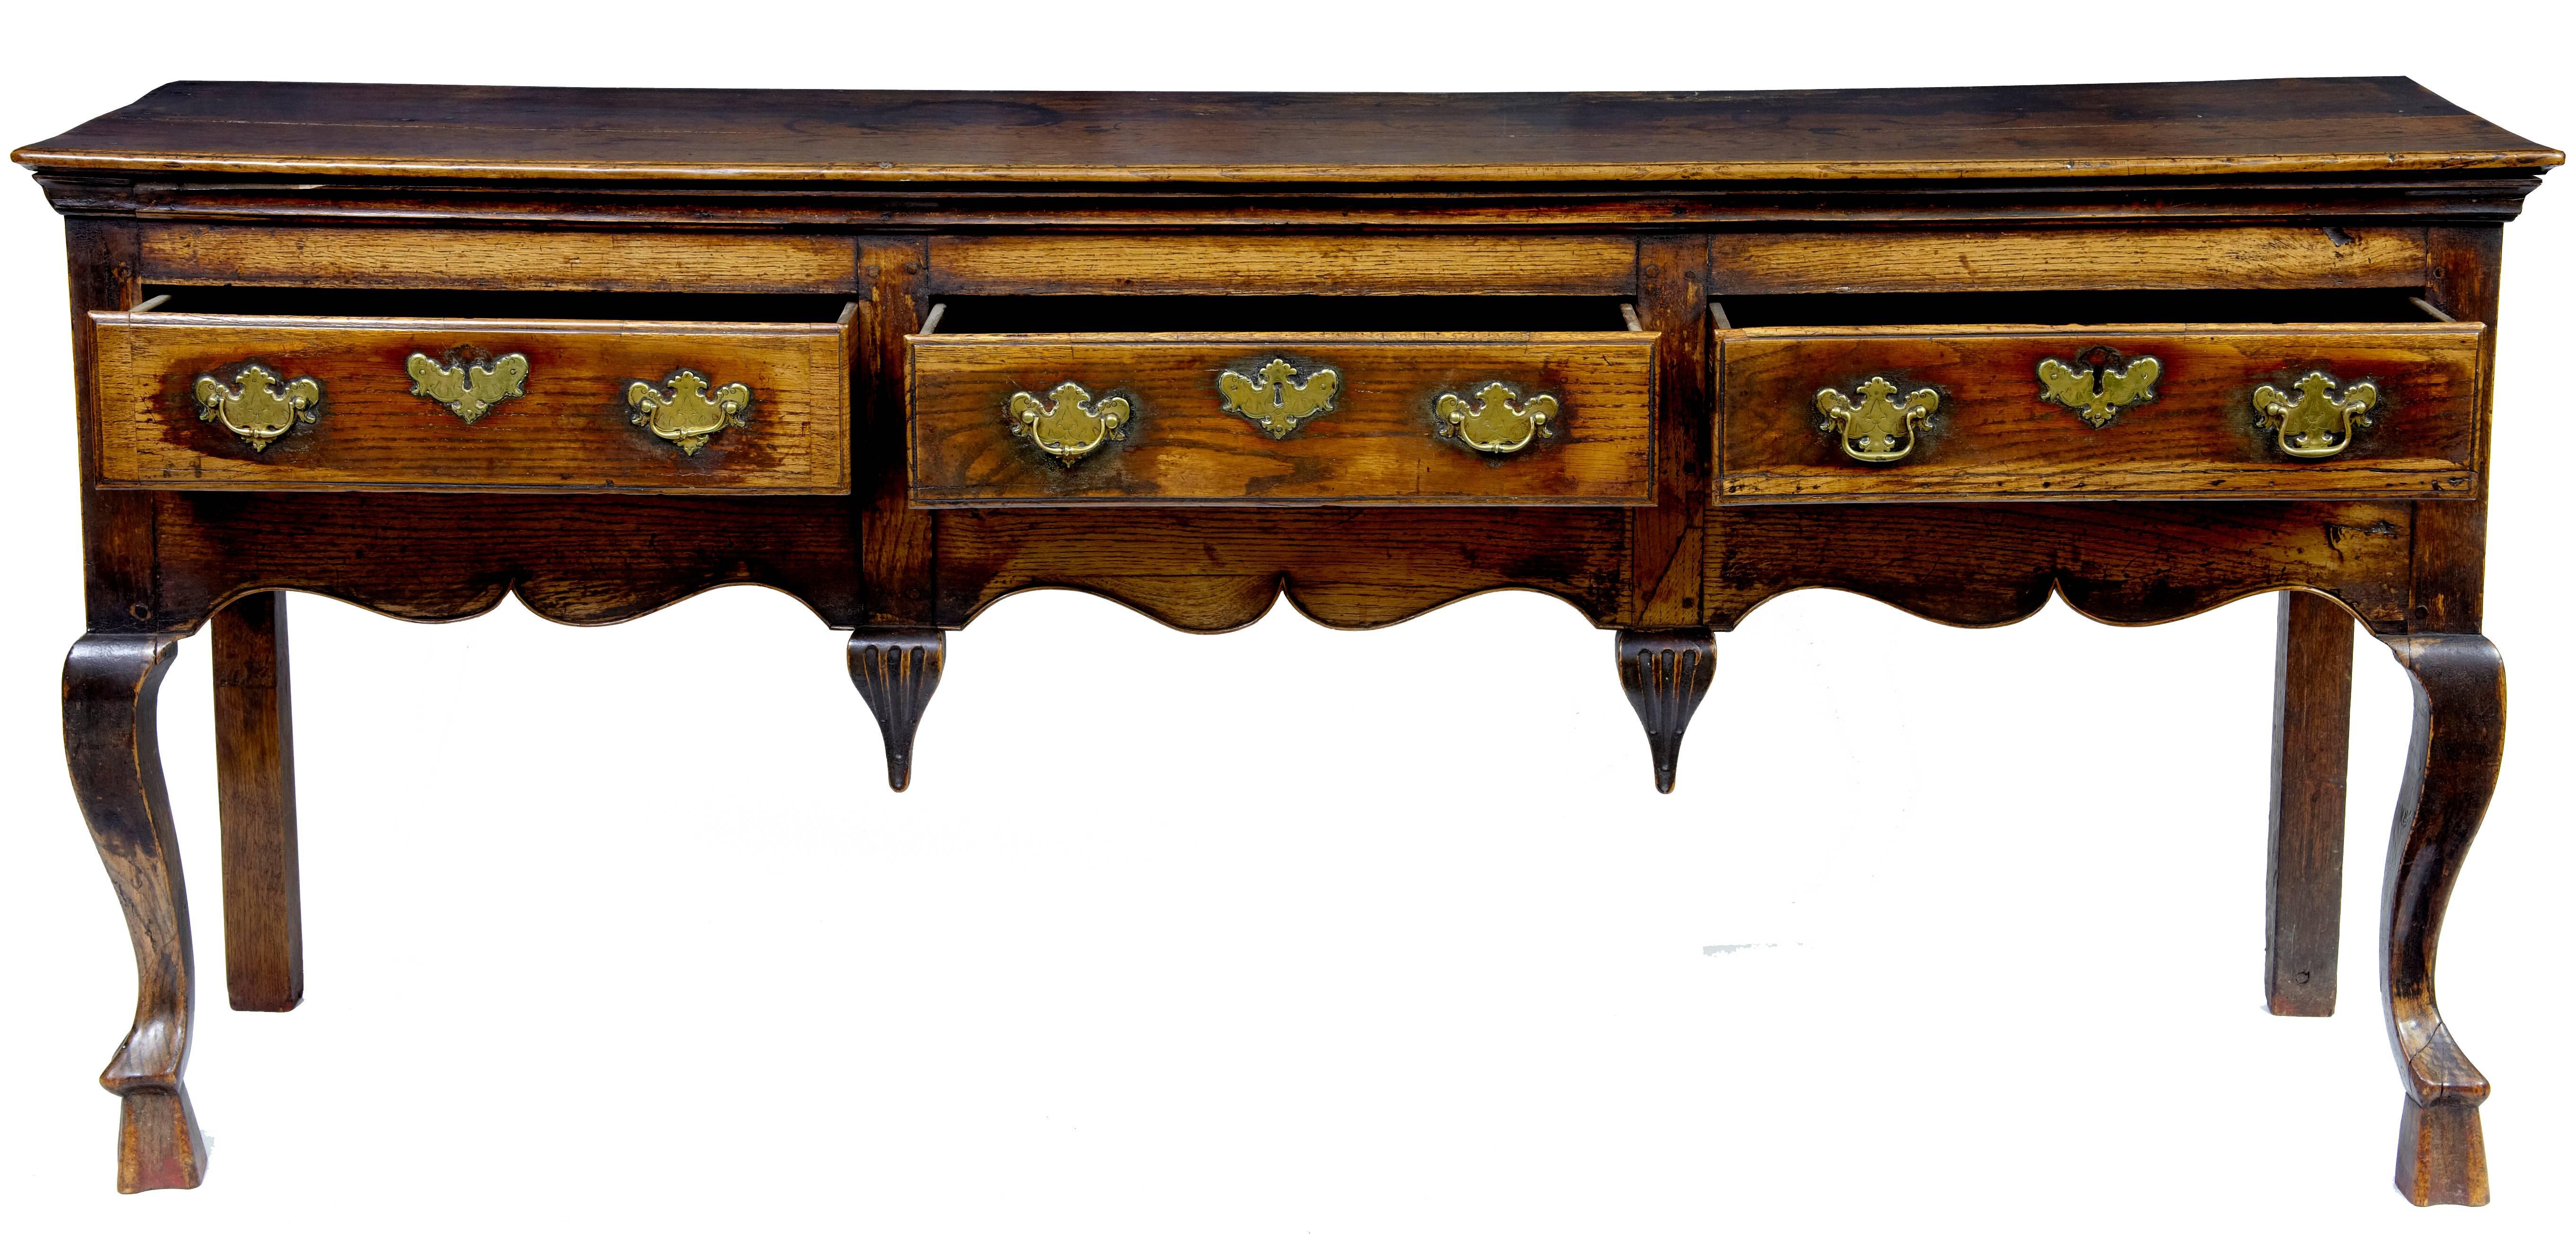 A superb quality early 18th century oak dresser, the moulded edge top above three oak lined drawers with original brass handles and escutcheons, a wonderfully shaped frieze decorated with inverted finials, supported on very rare and unusual cabriole